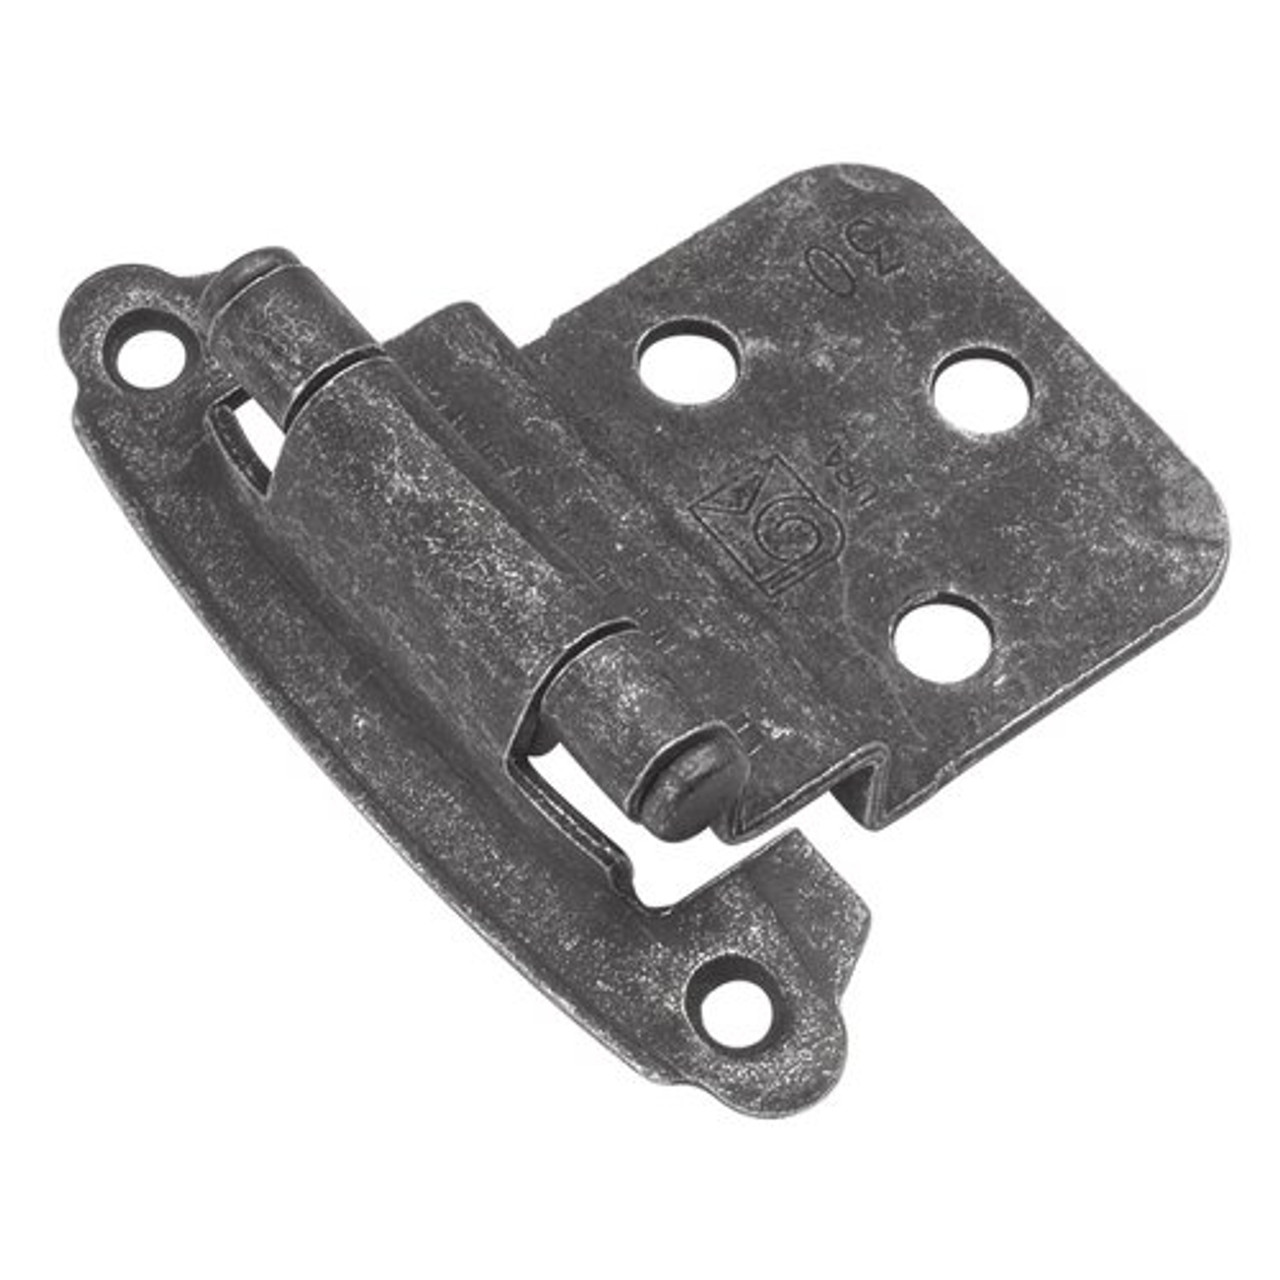 Hickory Hardware SURFACE SELF-CLOSING 3/8 IN. INSET HINGE P243